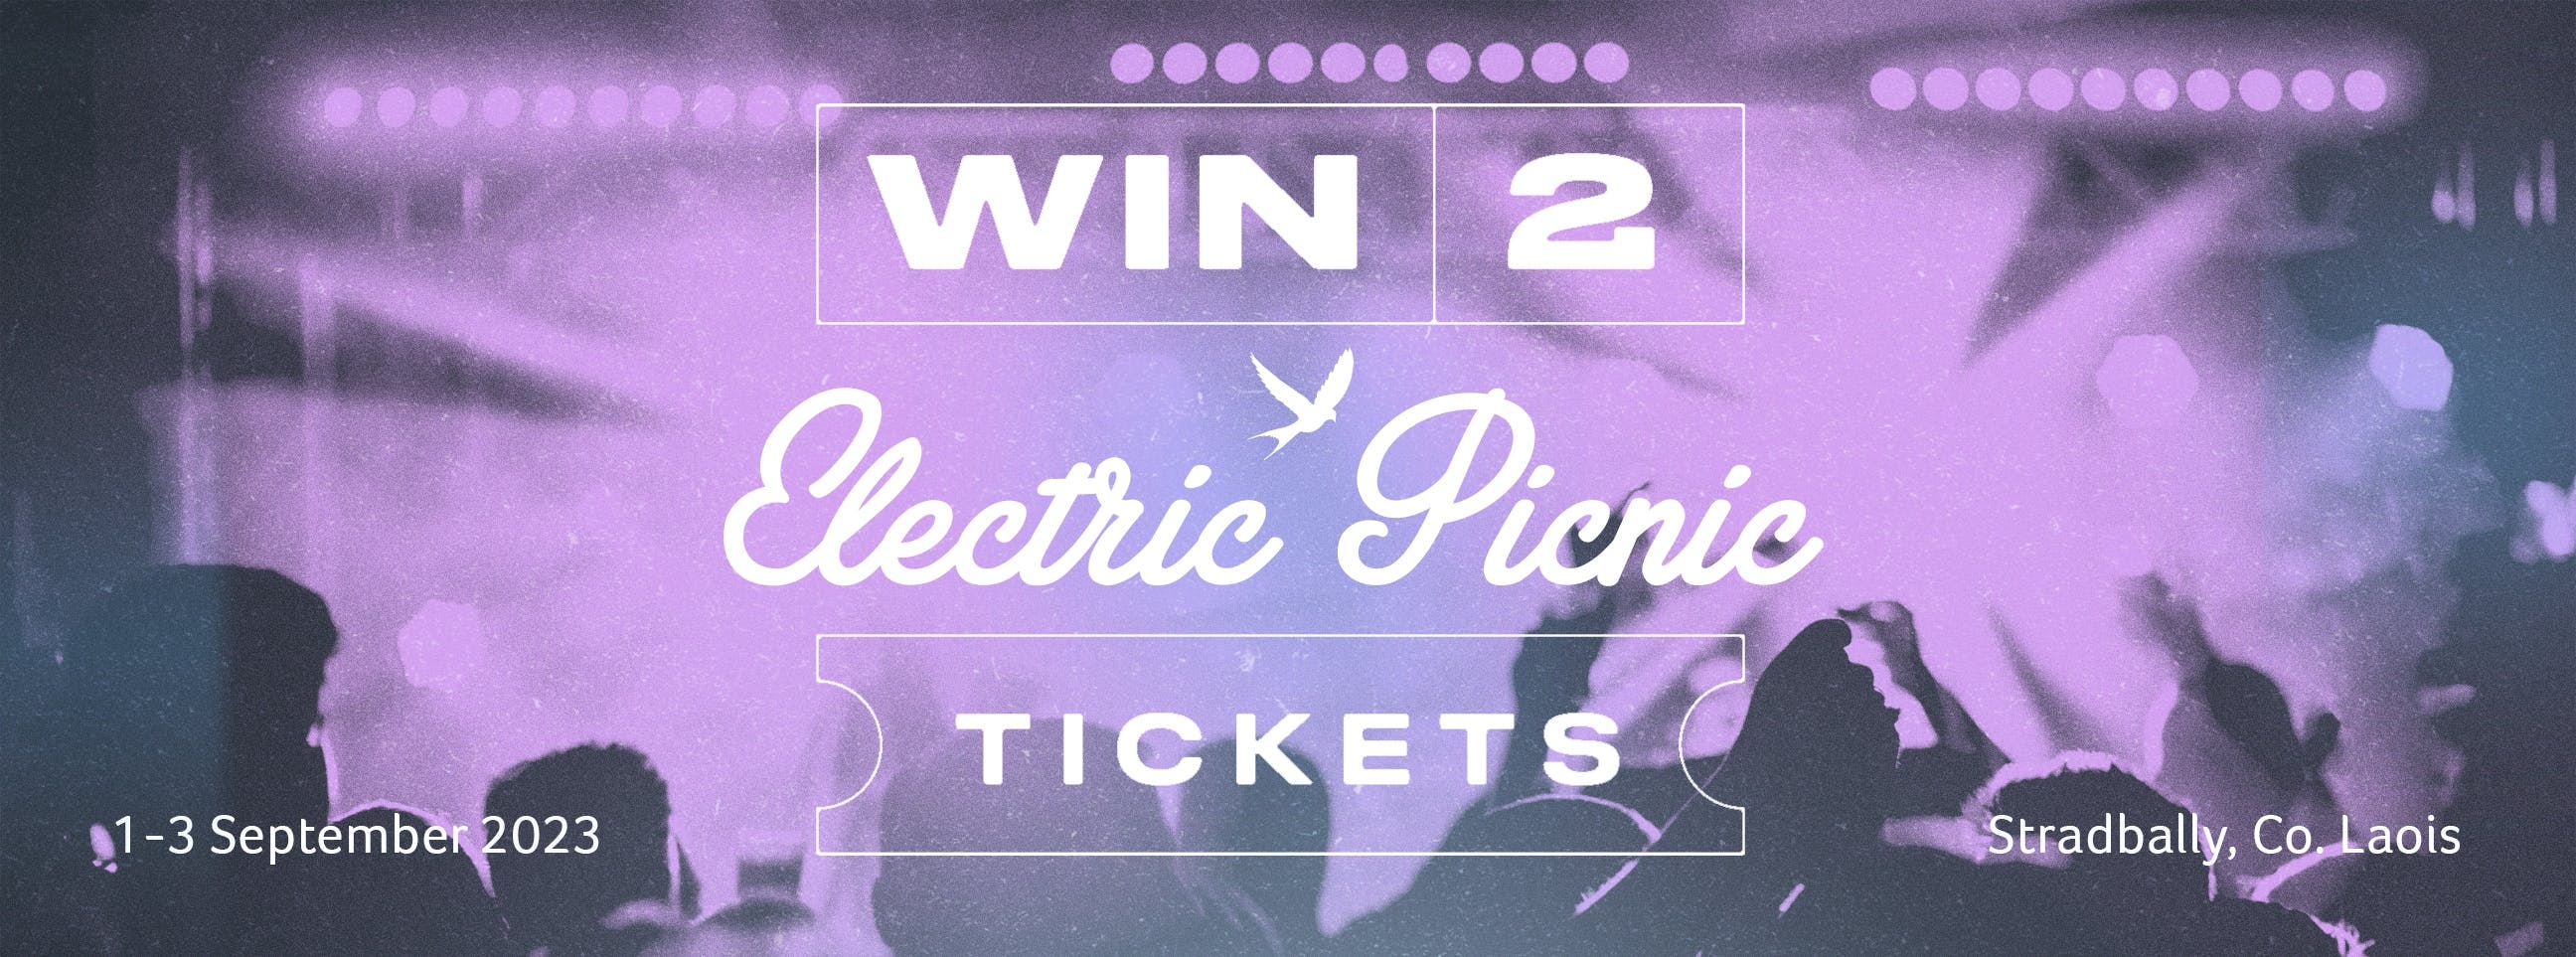 Win 2 Electric Picnic Tickets with OOHPod - September 2023, Stradbally Co. Laois